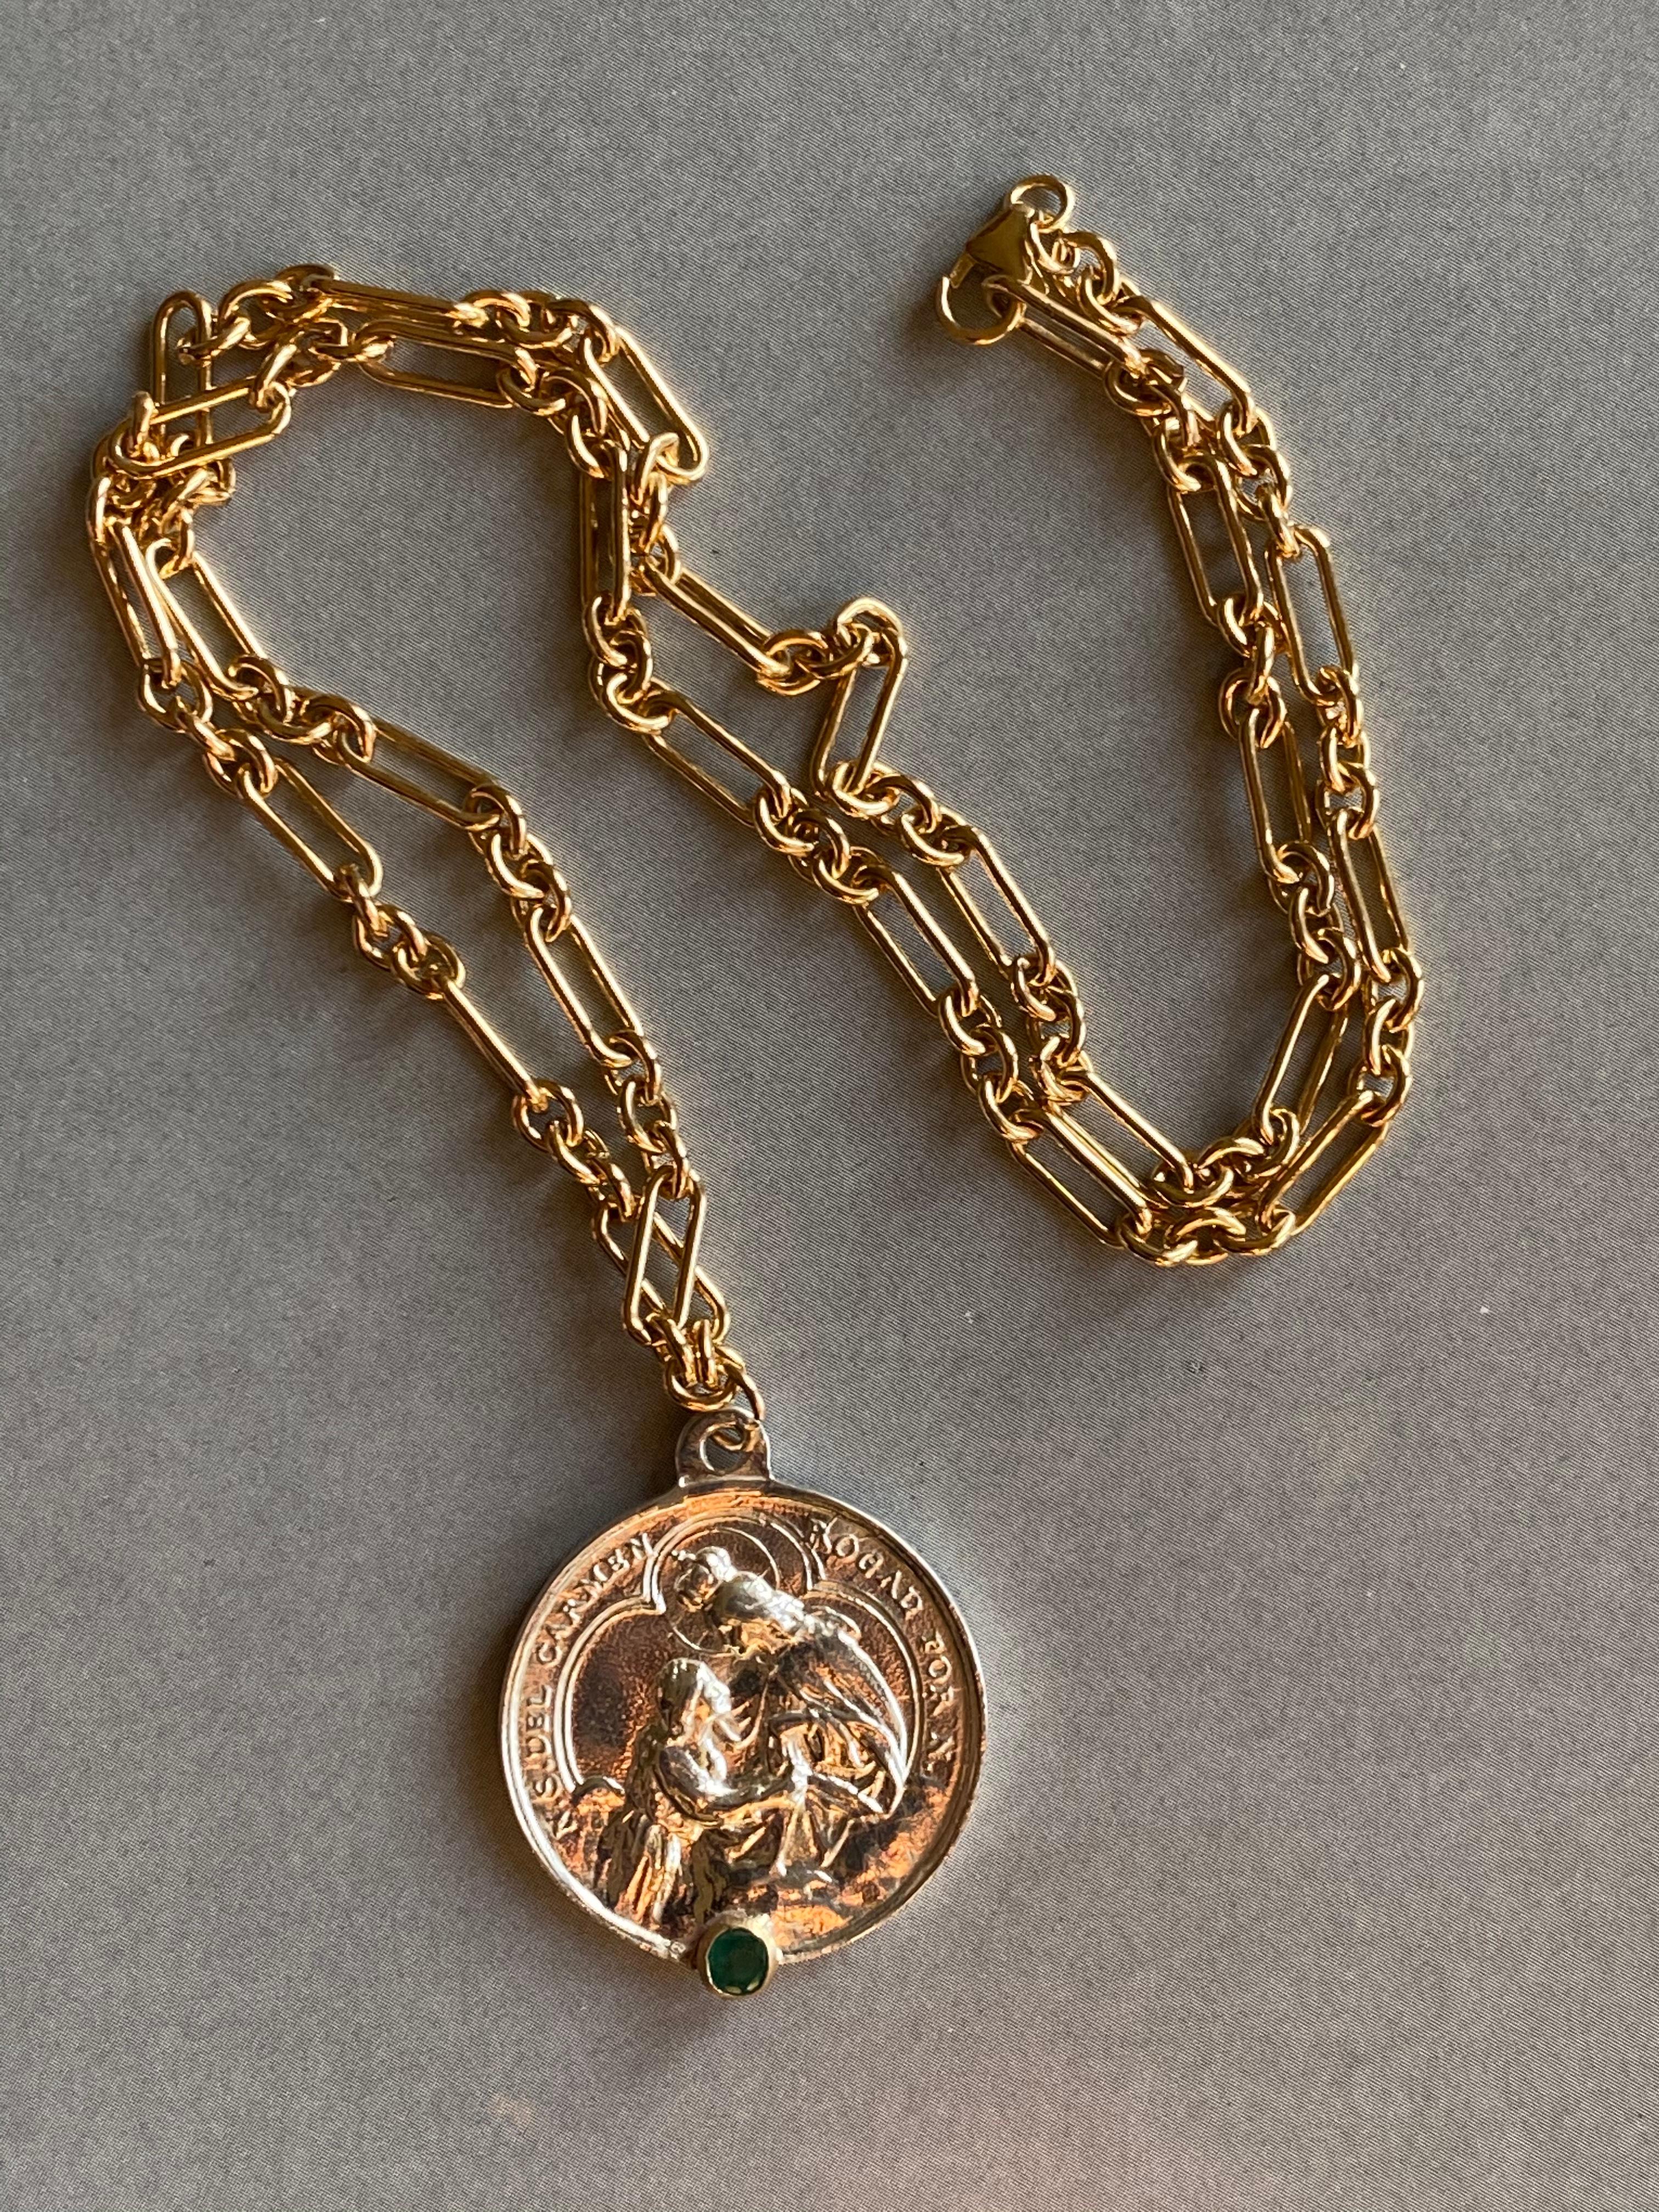 make coin necklace without drilling hole